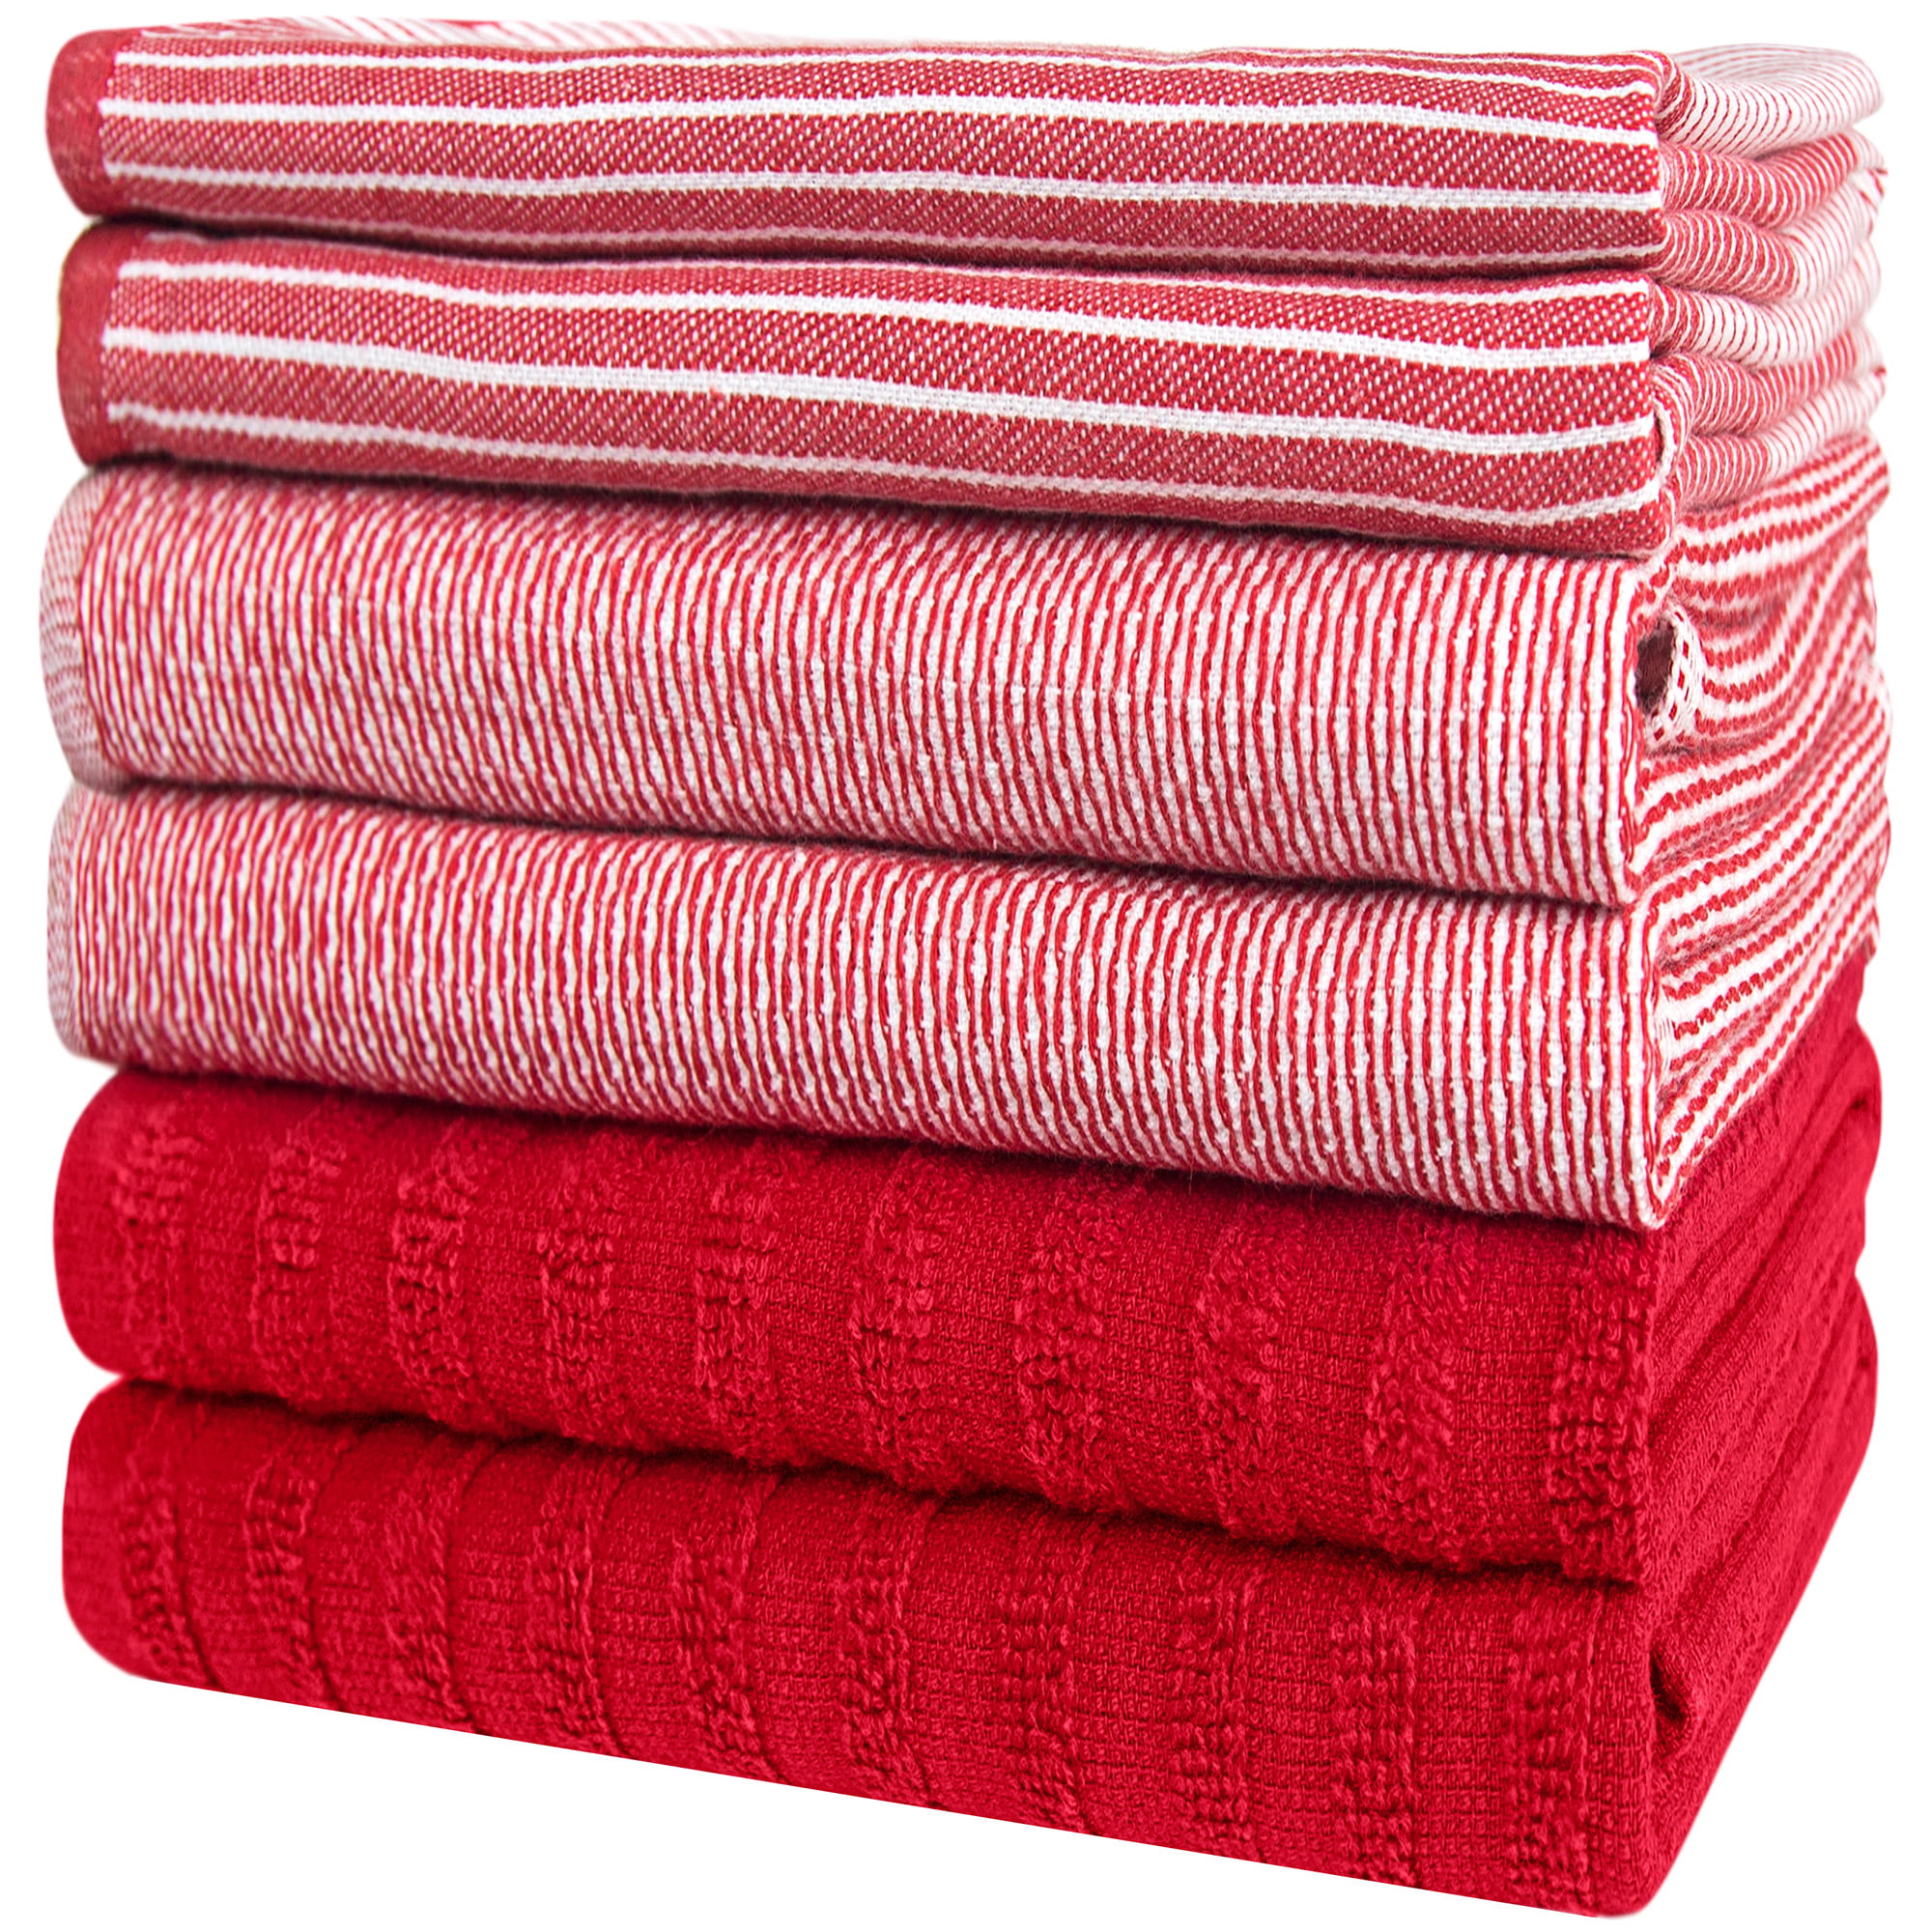 Amour Infini Classic Stripe Kitchen Dish Towels | 4 Pack | 28 x 20 inch, Over Sized | Multi-Use Kitchen Towels |100% Ring Spun Premium Cotton | Highly